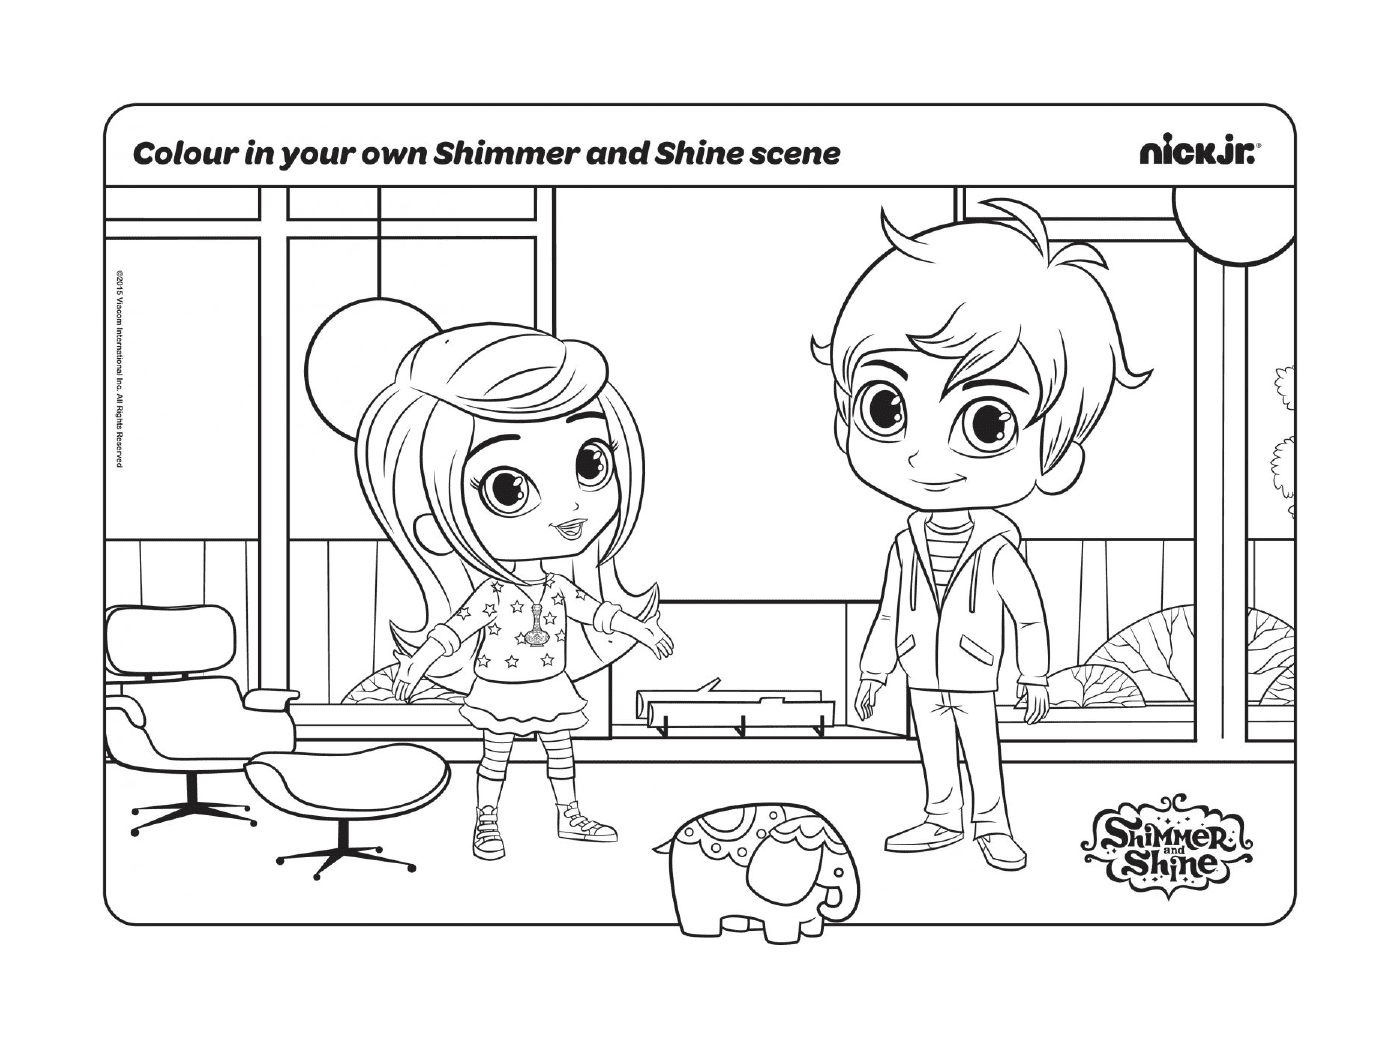  Color your own Shimmer and Shine scene 